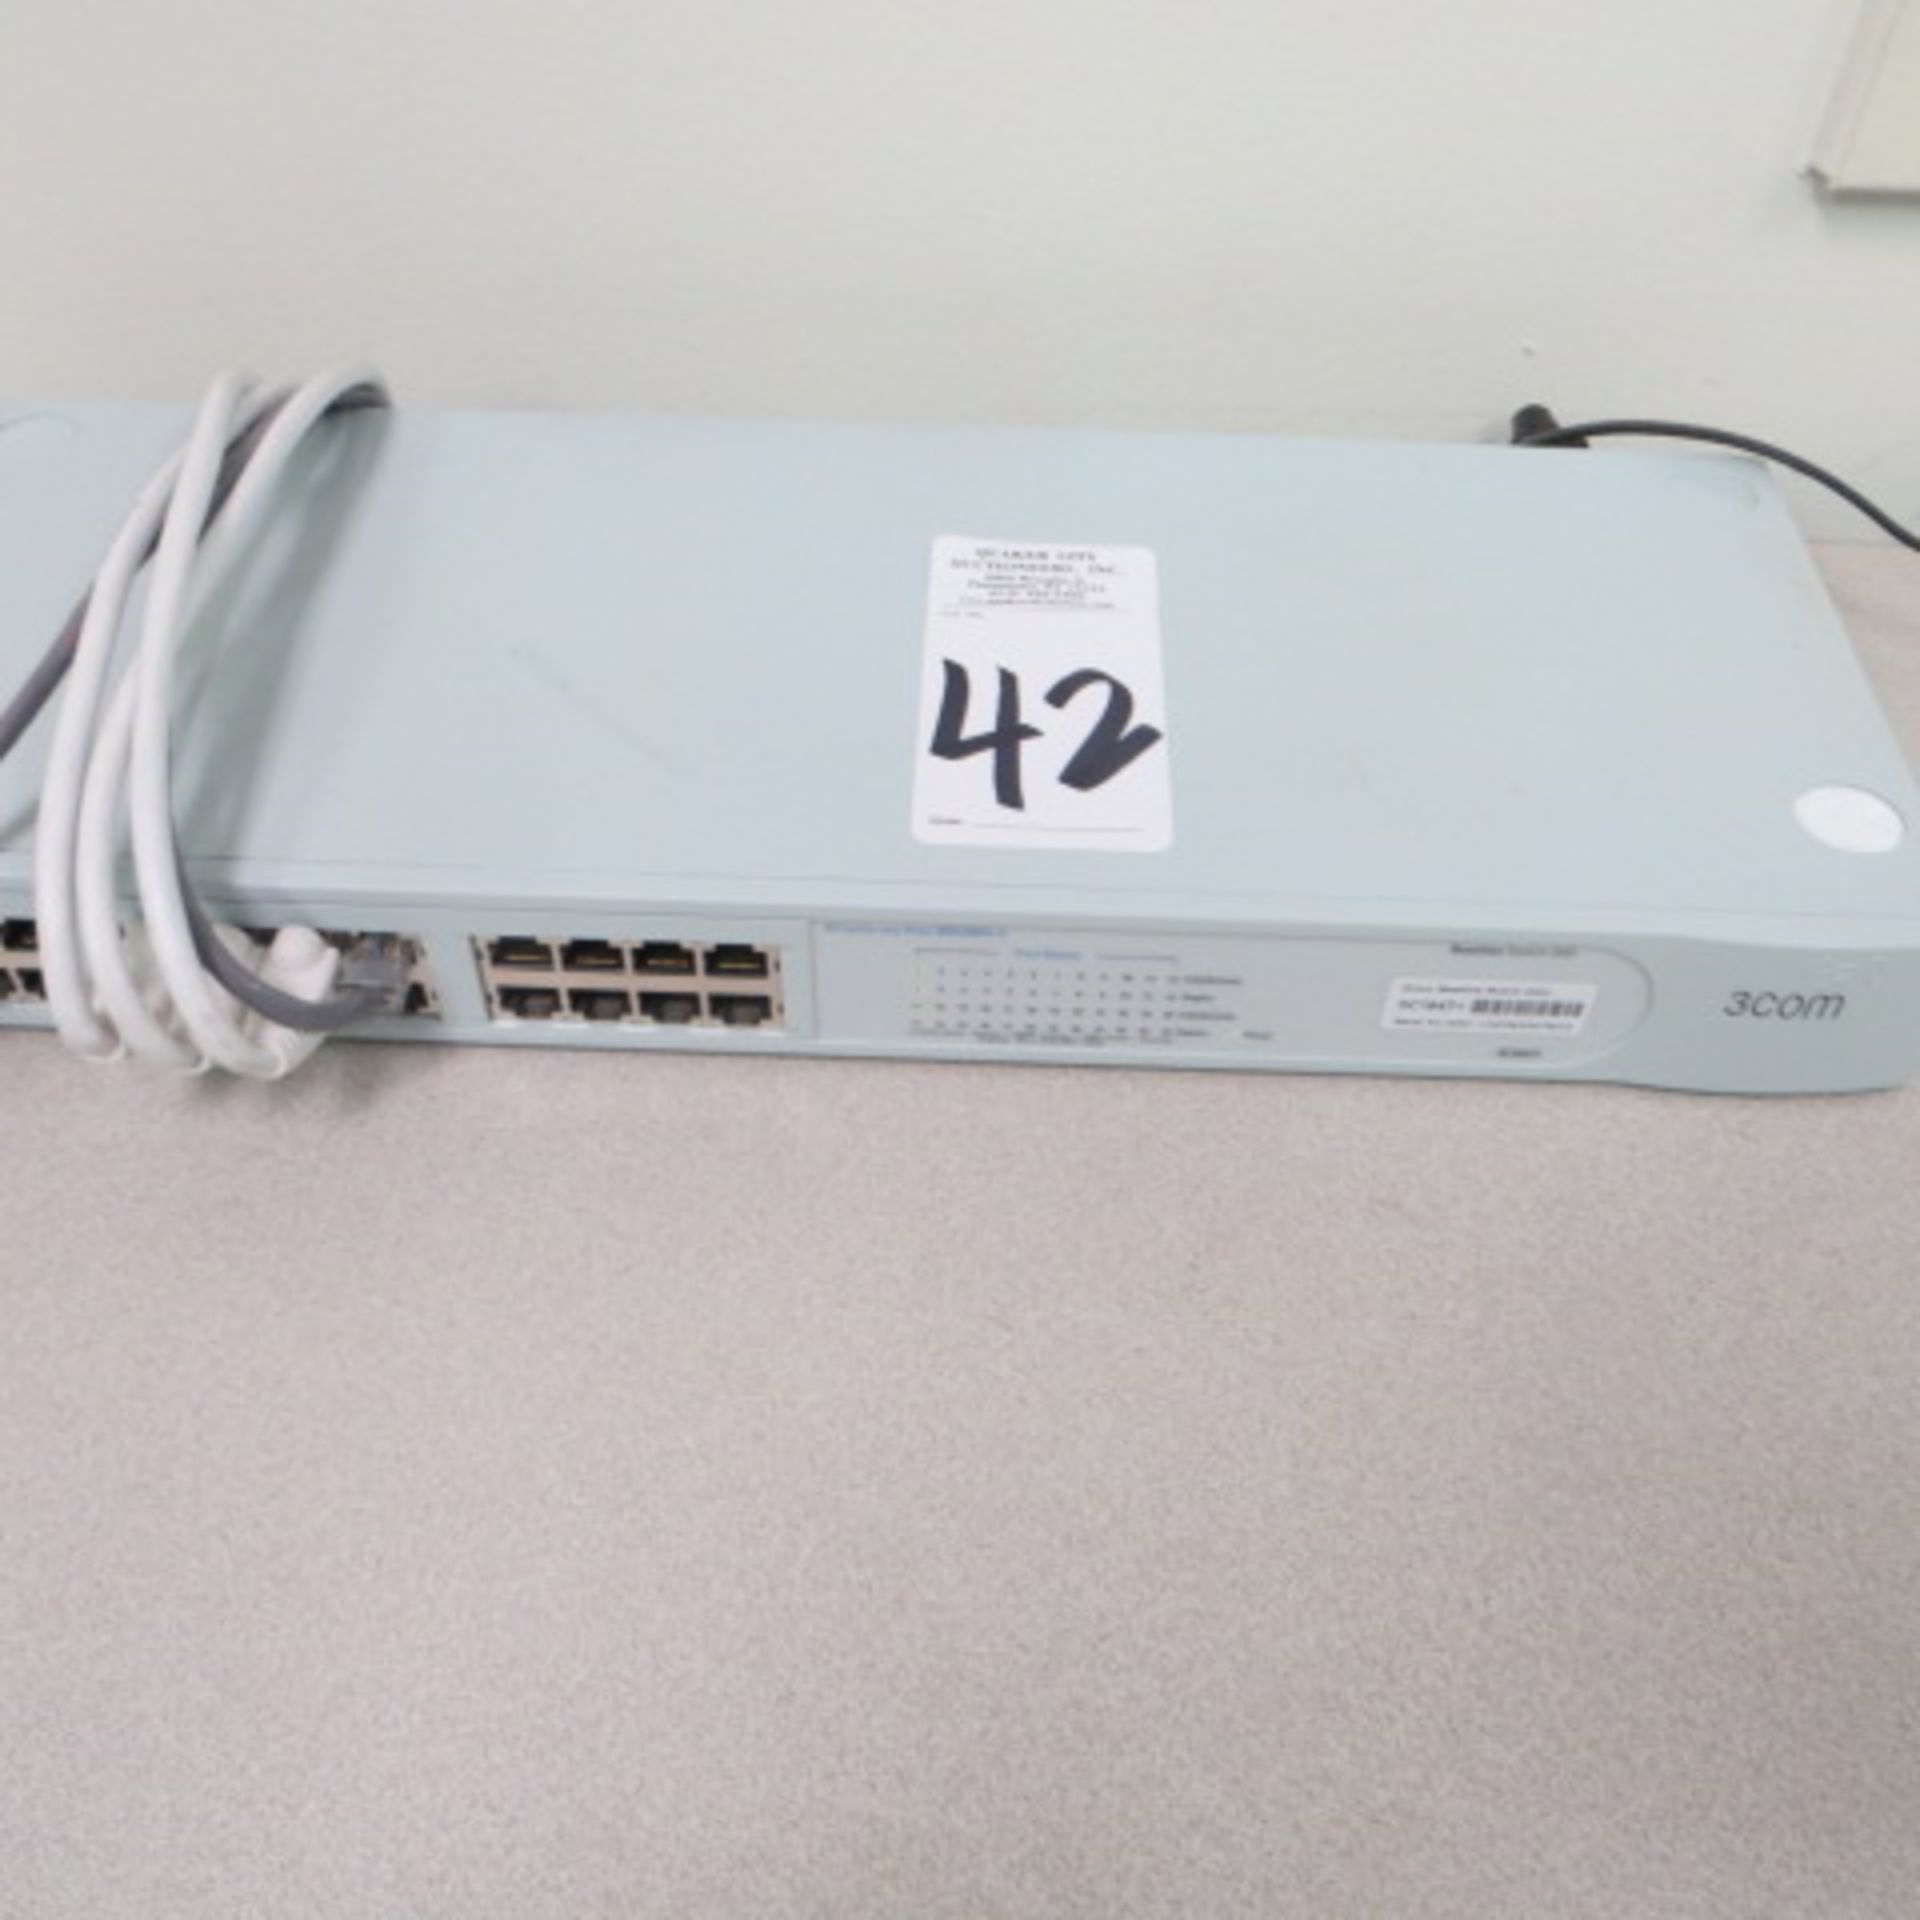 D-LINK DGS 1024G GIGABIT SWITCH & 2 3 COM BASELINE SWITCHES 2824 & 2024 - Image 2 of 2